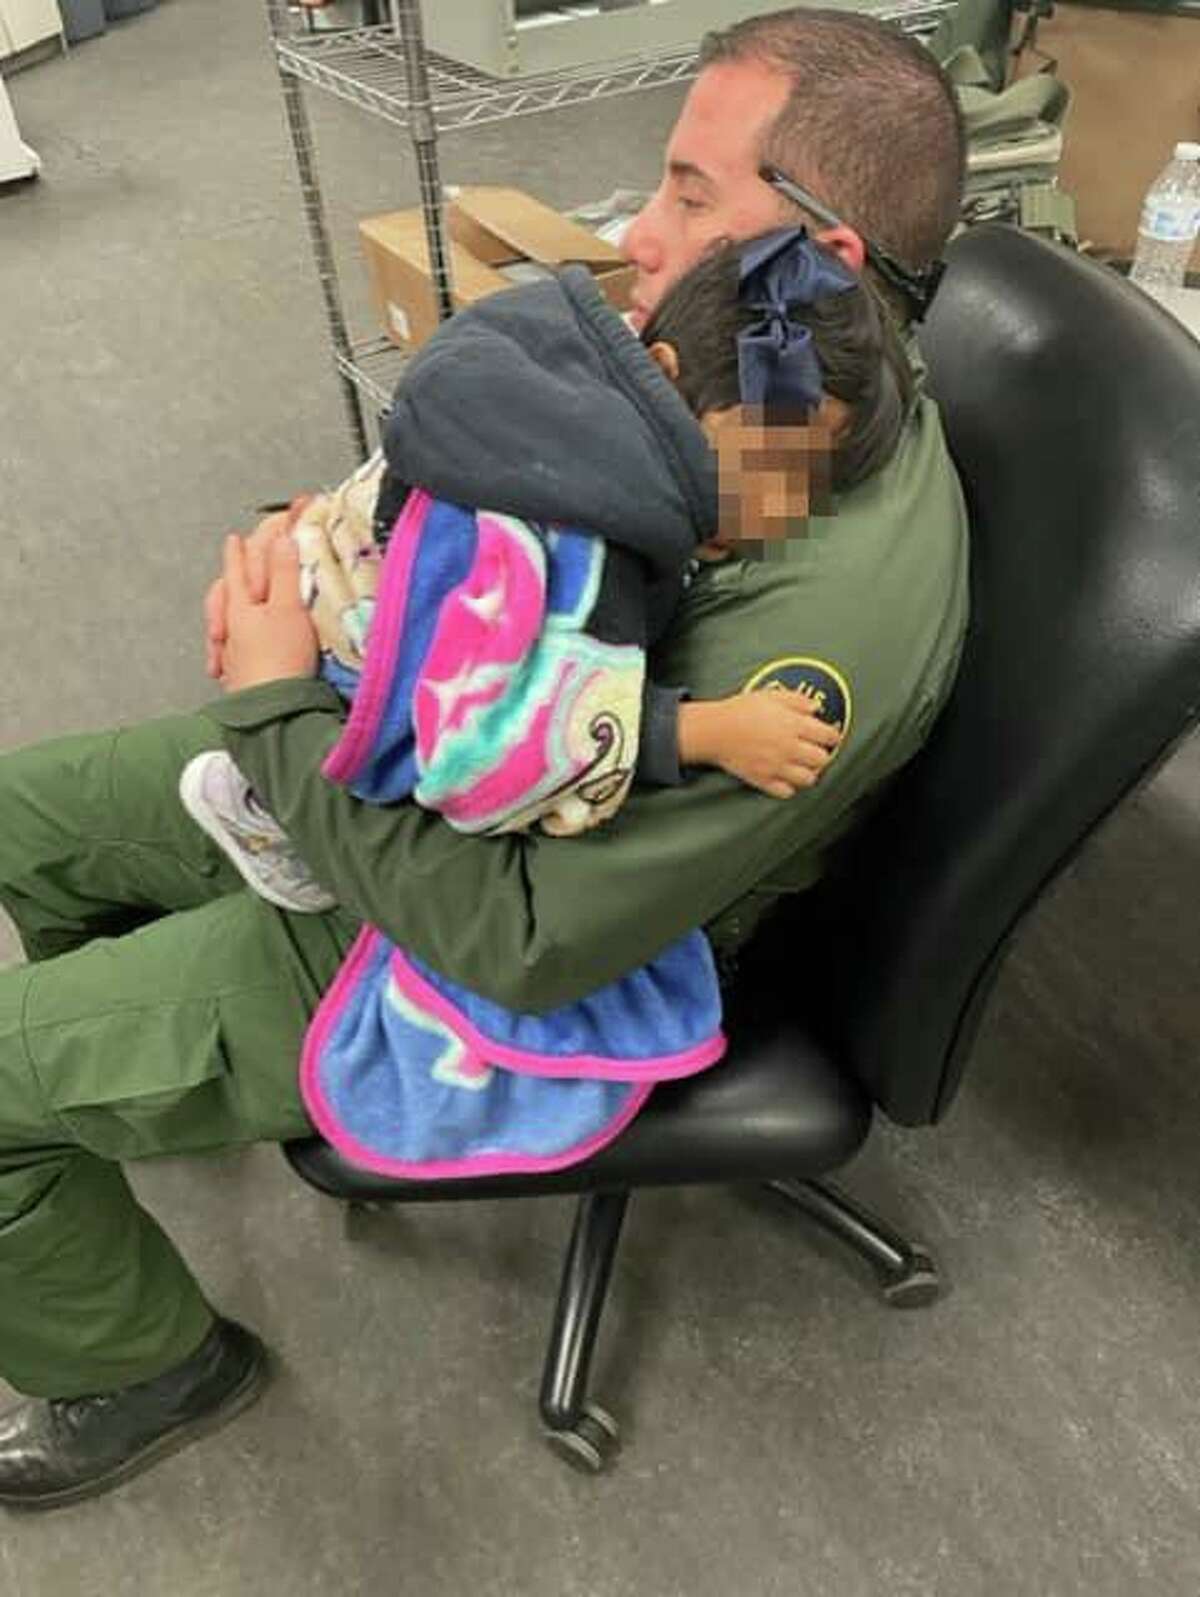 A U.S. Border Patrol Laredo Station agent is pictured with a young child after she was discovered at the Interstate 35 checkpoint without her parents on March 8, 2022.